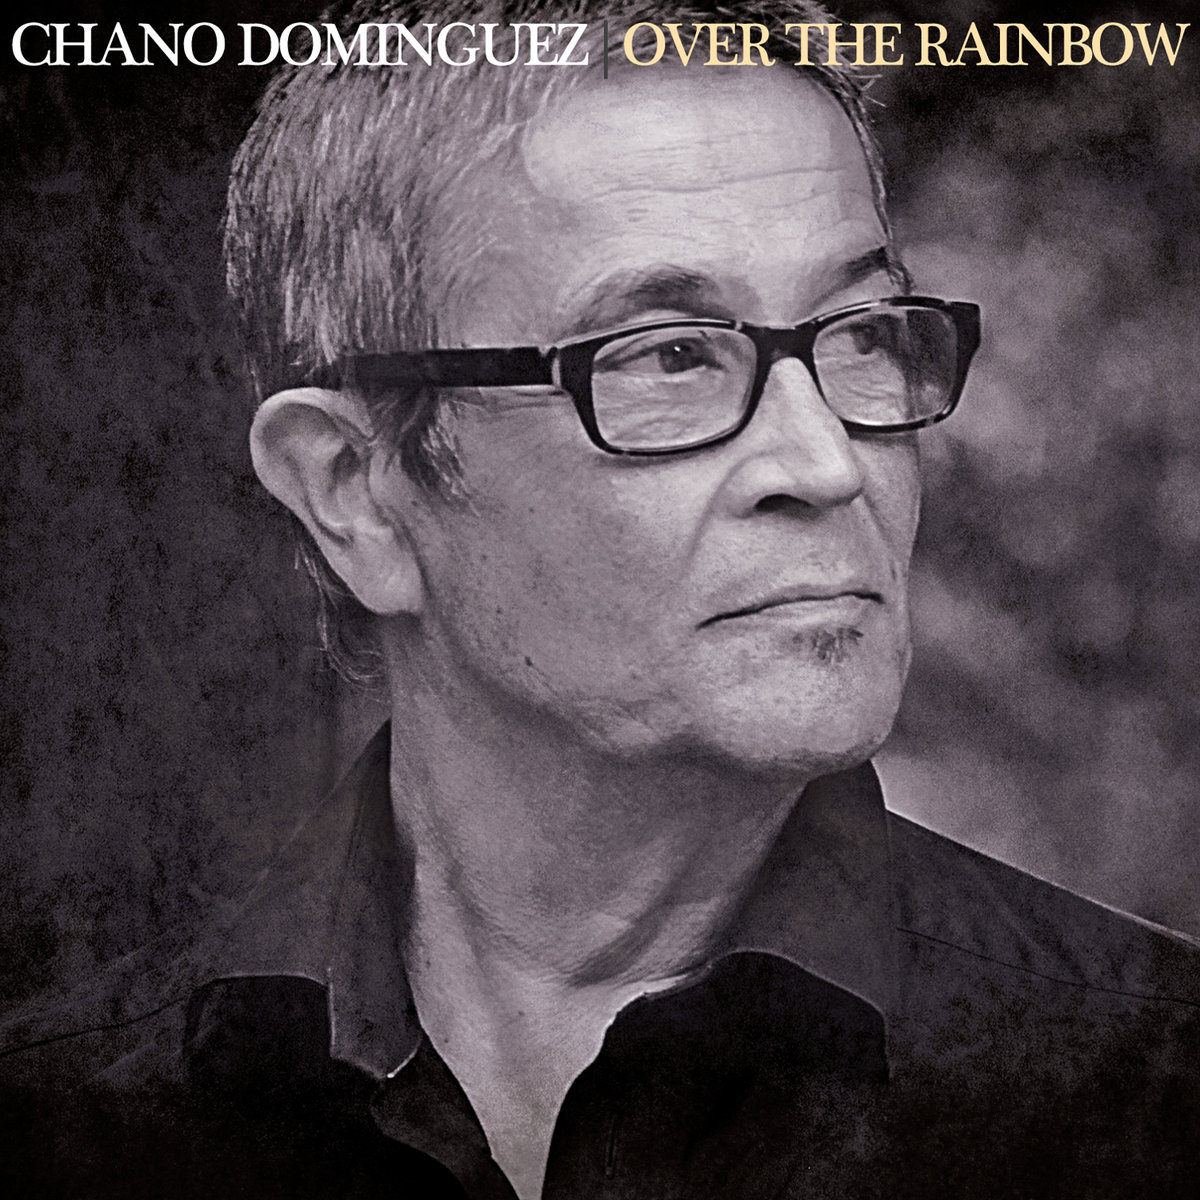 REVIEW: Chano Dominguez - Over the Rainbow